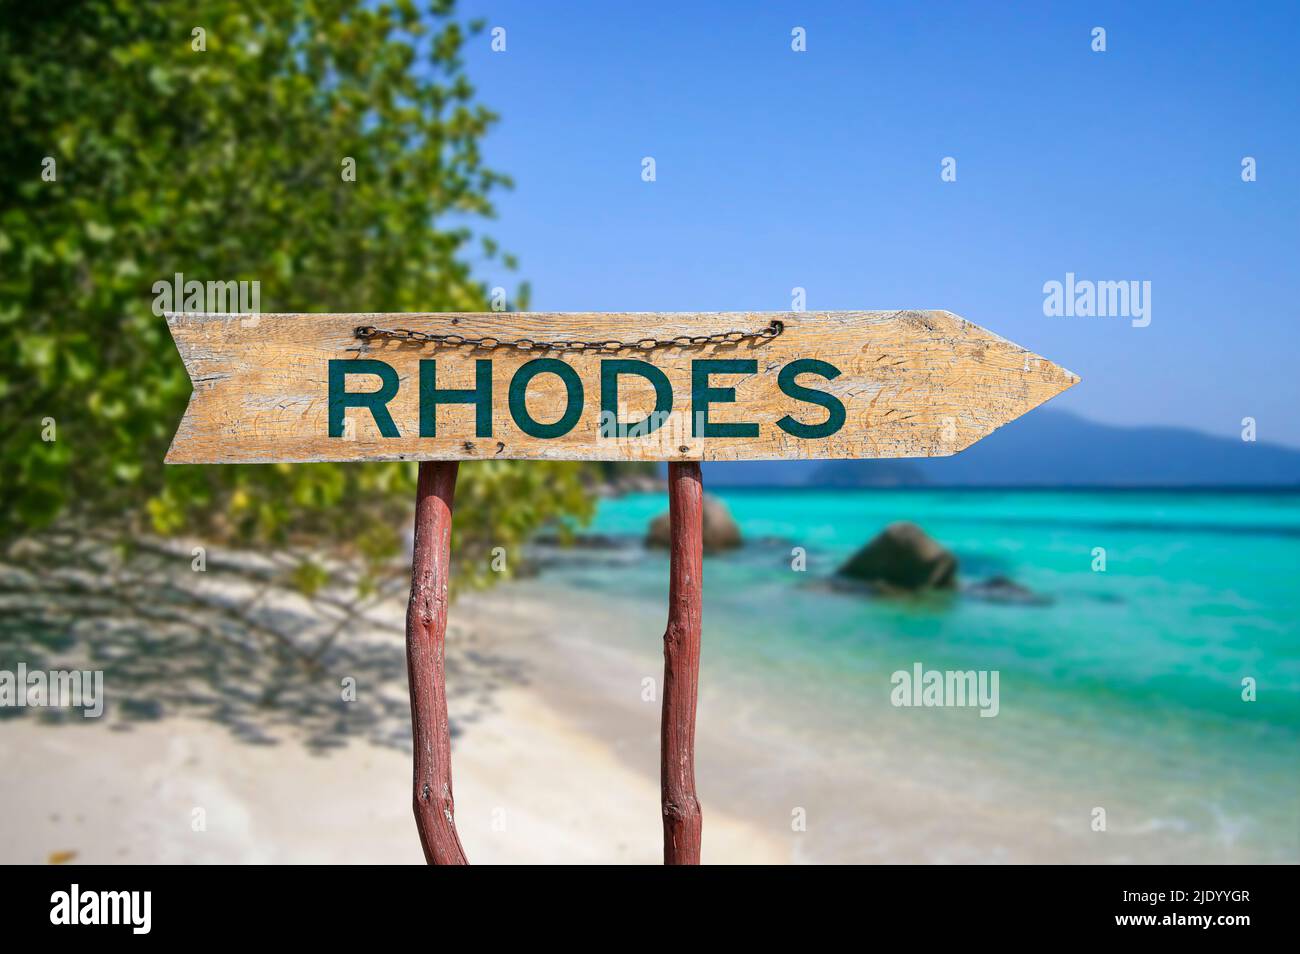 Rhodes wooden arrow road sign against beach with white sand and turquoise water background. Travel to Greece concept. Stock Photo